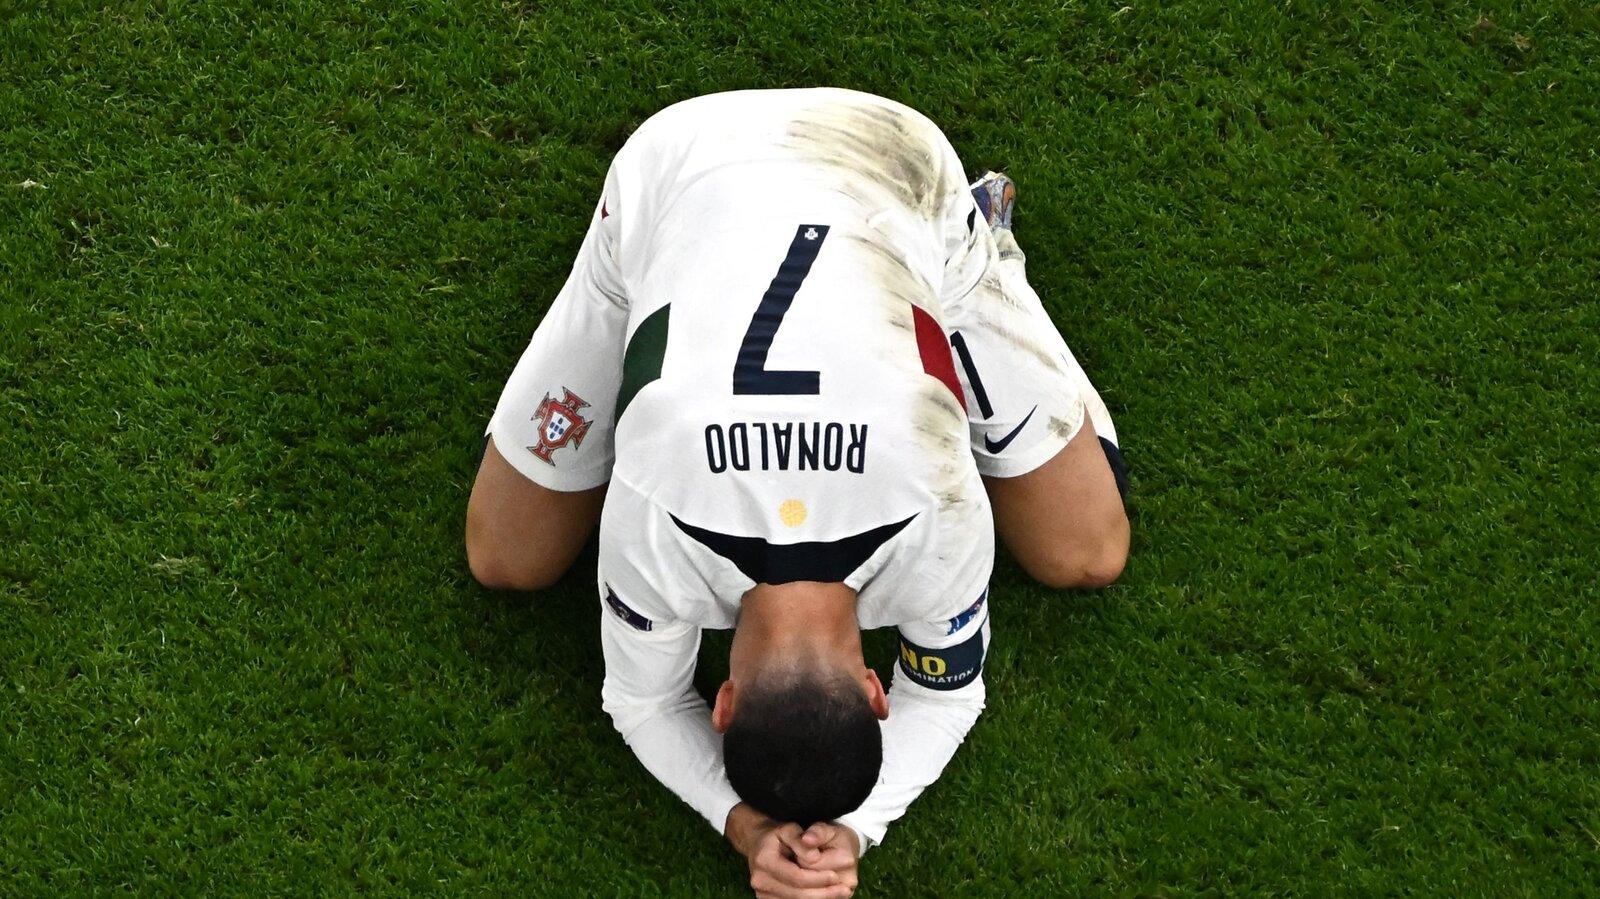 Ronaldo In Tears After What Could Be His Final World Cup The New